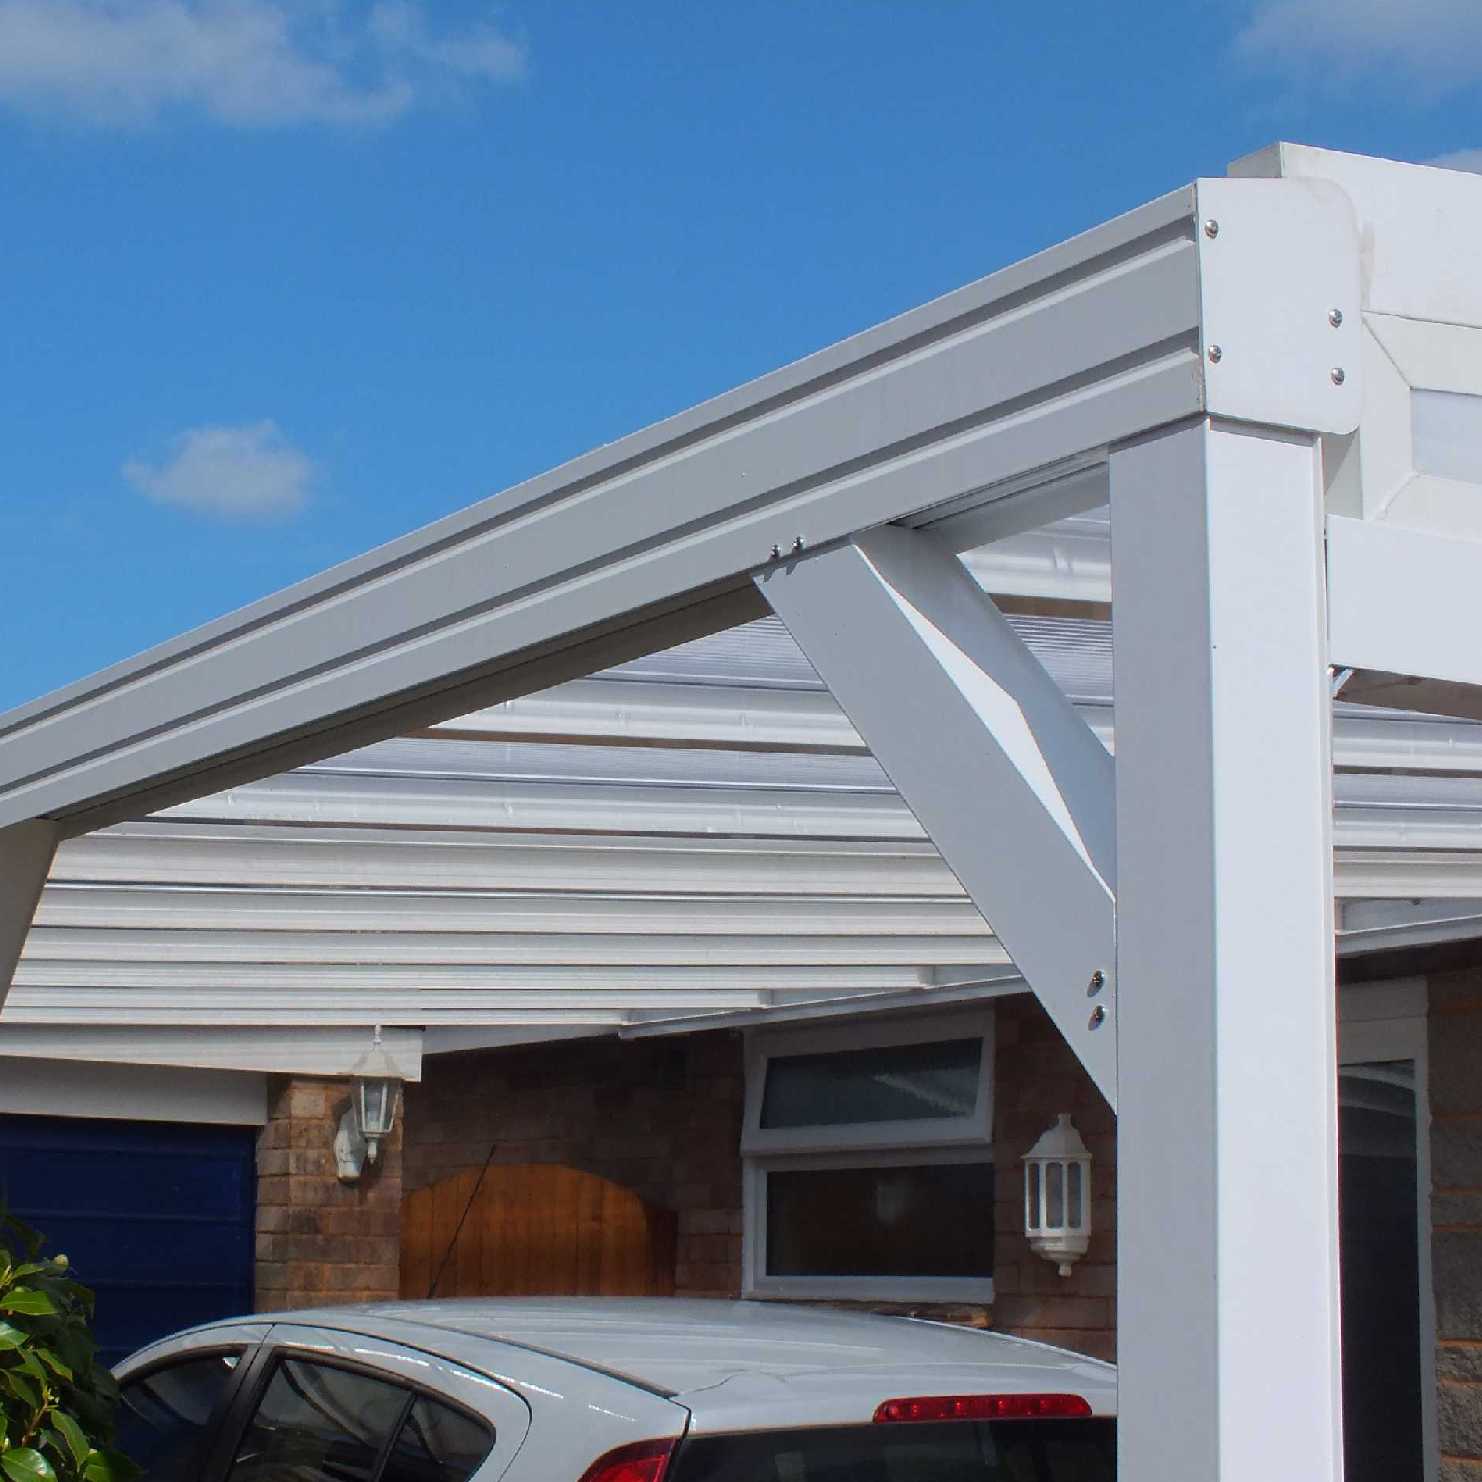 Buy Omega Smart Lean-To Canopy, White with 16mm Polycarbonate Glazing - 9.9m (W) x 3.5m (P), (5) Supporting Posts online today